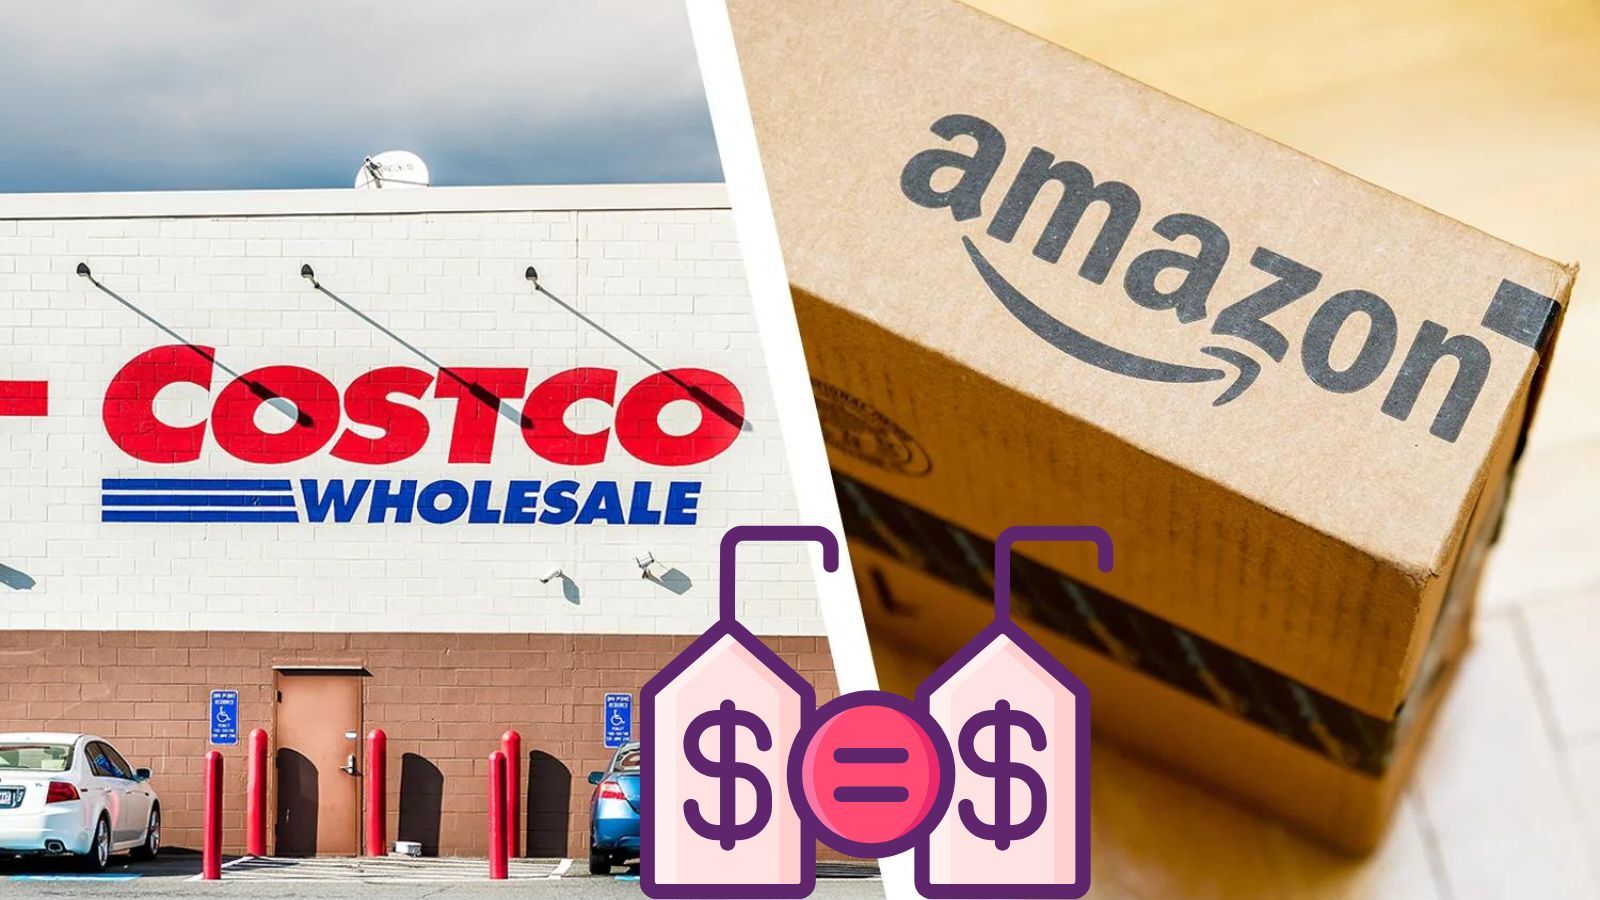 Does Costco Price Match Amazon? (Here's What You're Interested In)